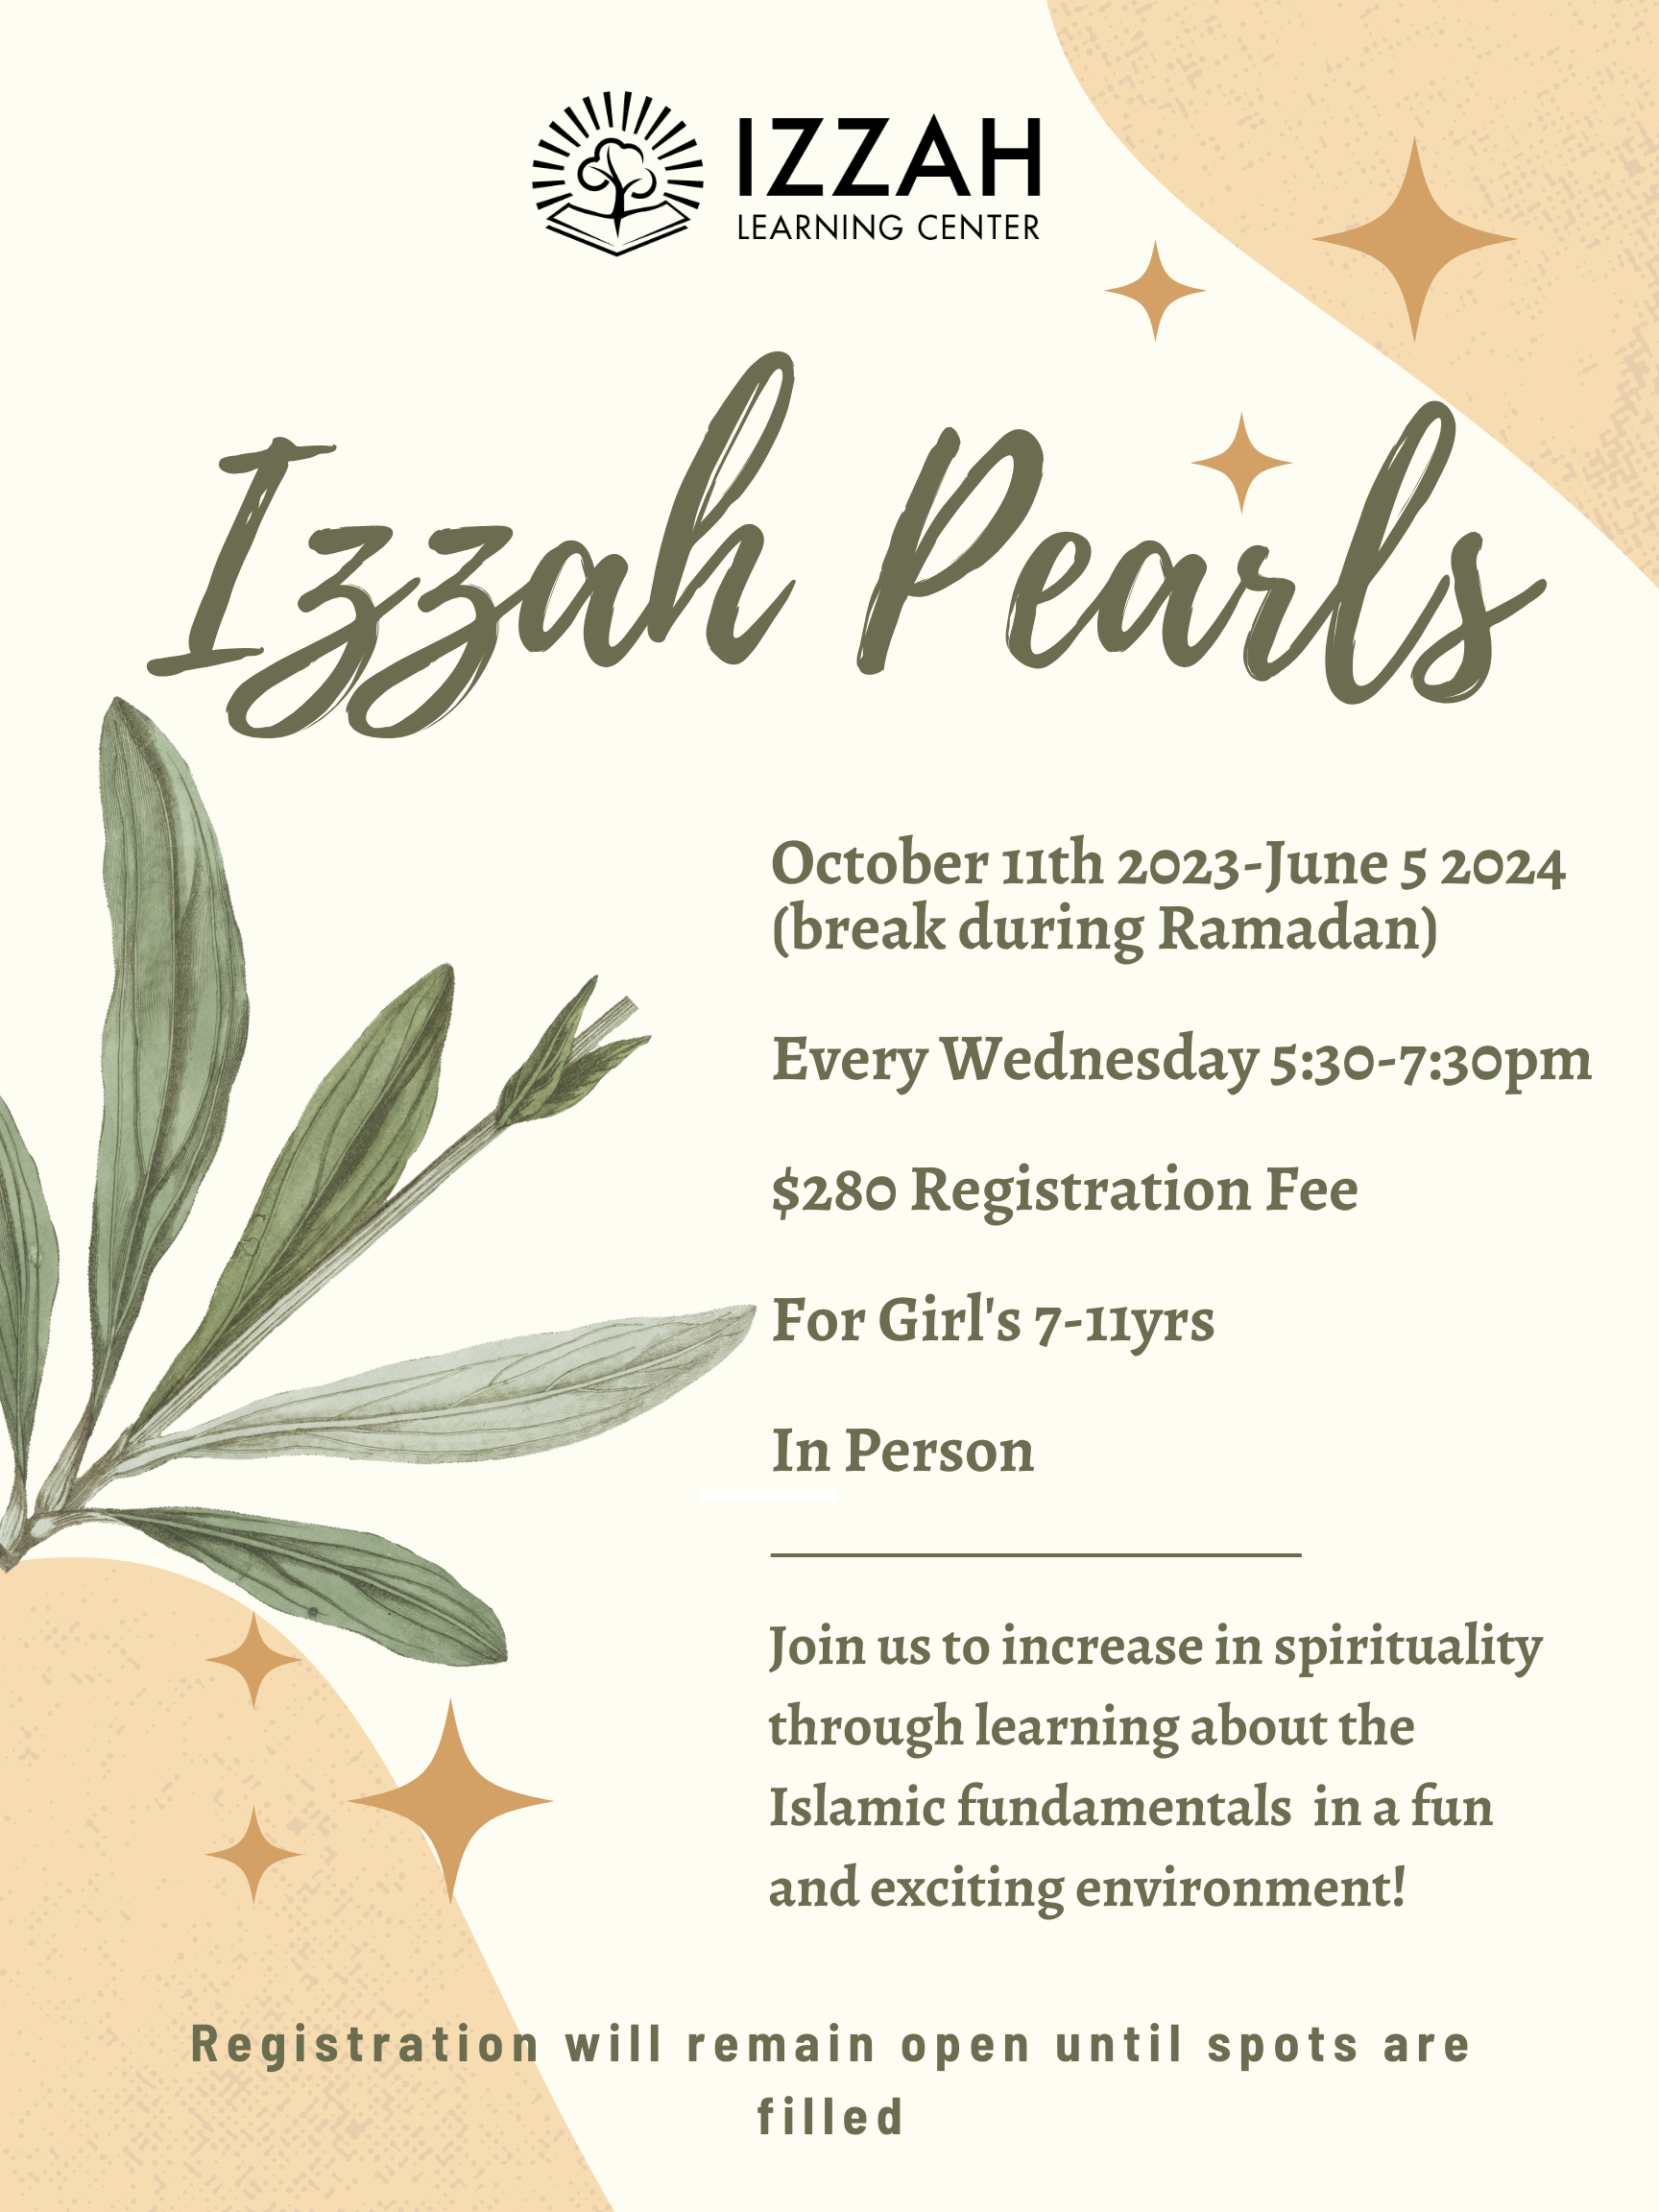 Izzah Pearls Program for Sisters Ages 7 to 11